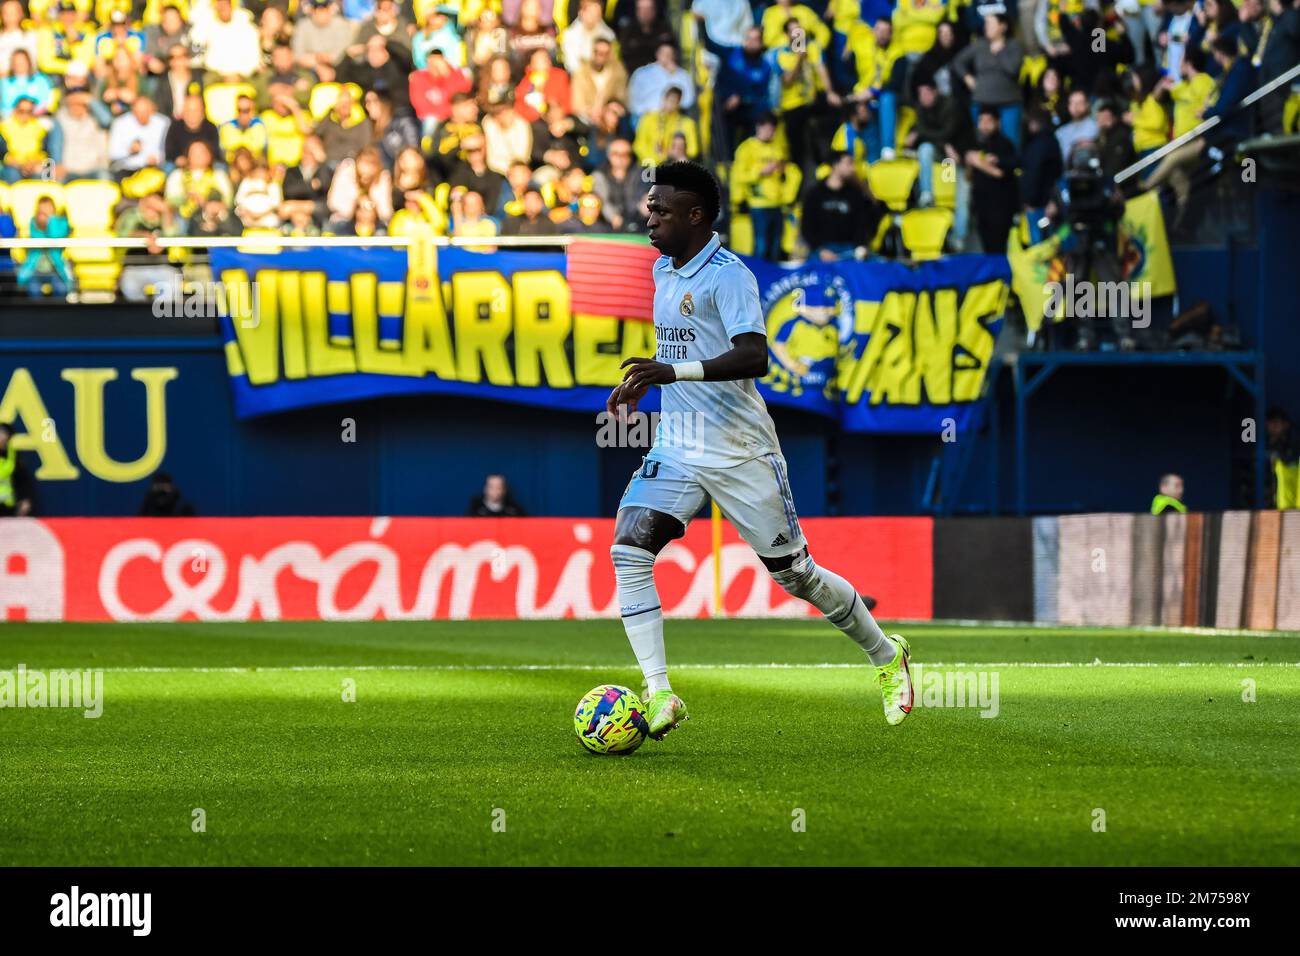 VILLARREAL, SPAIN - JANUARY 7: Vinicius Jr of Real Madrid CF making a pass during the match between Villarreal CF and Real Madrid CF of La Liga Santander on January 7, 2023 at Estadi de la Ceramica in Villarreal, Spain. (Photo by Samuel Carreño/ PX Images) Credit: Px Images/Alamy Live News Stock Photo